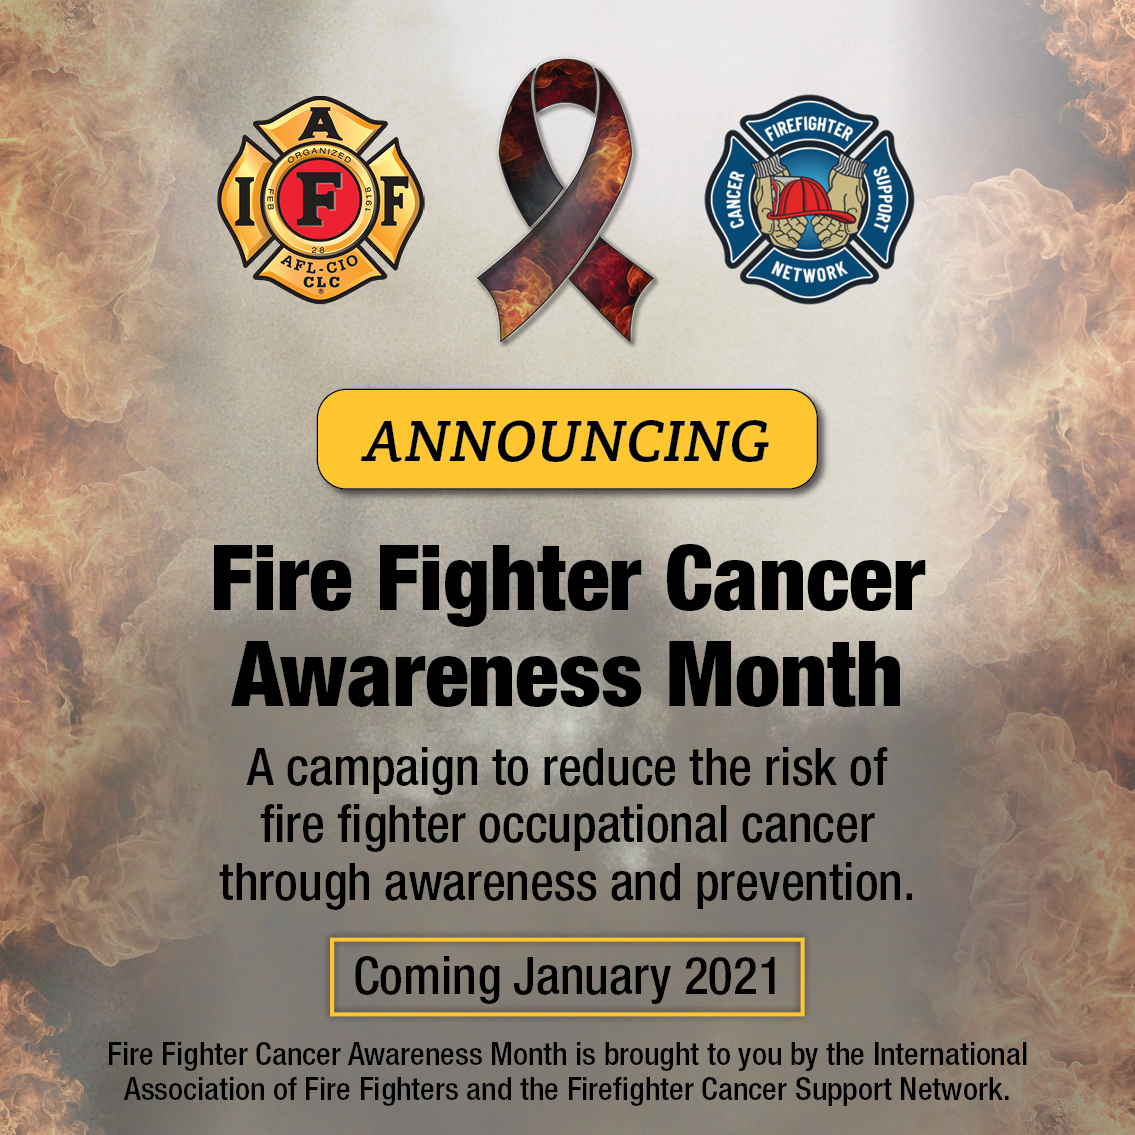 Iaff On Twitter Firefighters Are More Likely To Be Diagnosed With Certain Types Of Cancer Than The General Public Look For Targeted Education About Best Practices And Resources To Reduce The Impact